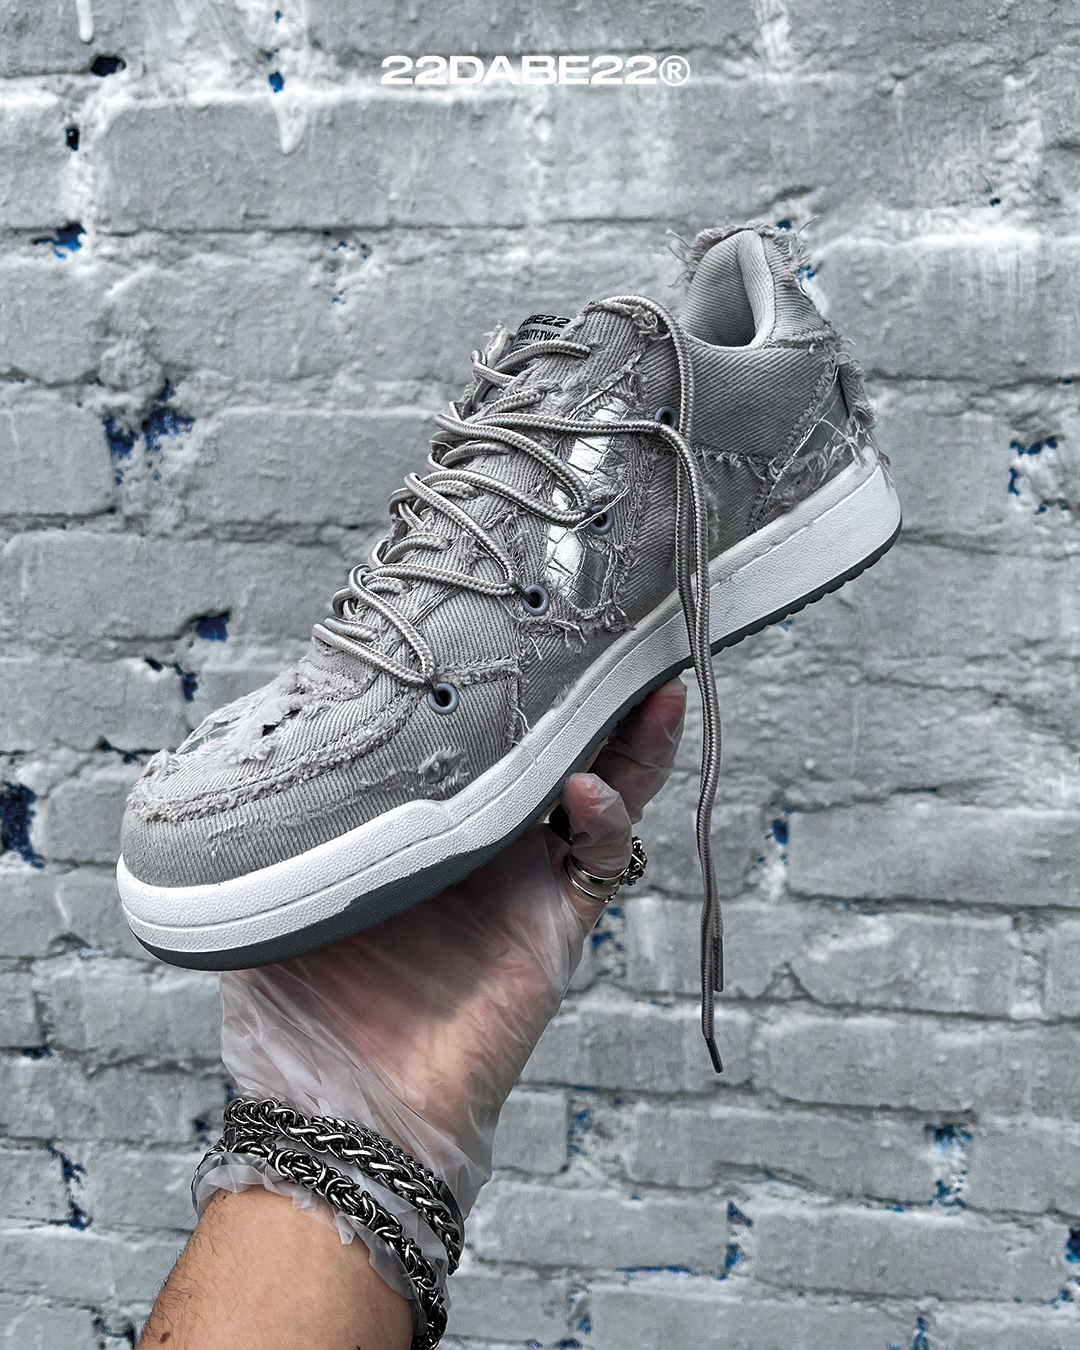 The DABE RANGER TWENTYTWO GREY shoe, a streetwear statement piece with metallic details under denim fabric on the upper. The shoe features double laces for extra style and versatility. Each shoe is handmade and unique, with every hole made by hand, giving it a one-of-a-kind look. The shoe is perfect for those who want to stand out from the crowd and make a fashion statement.